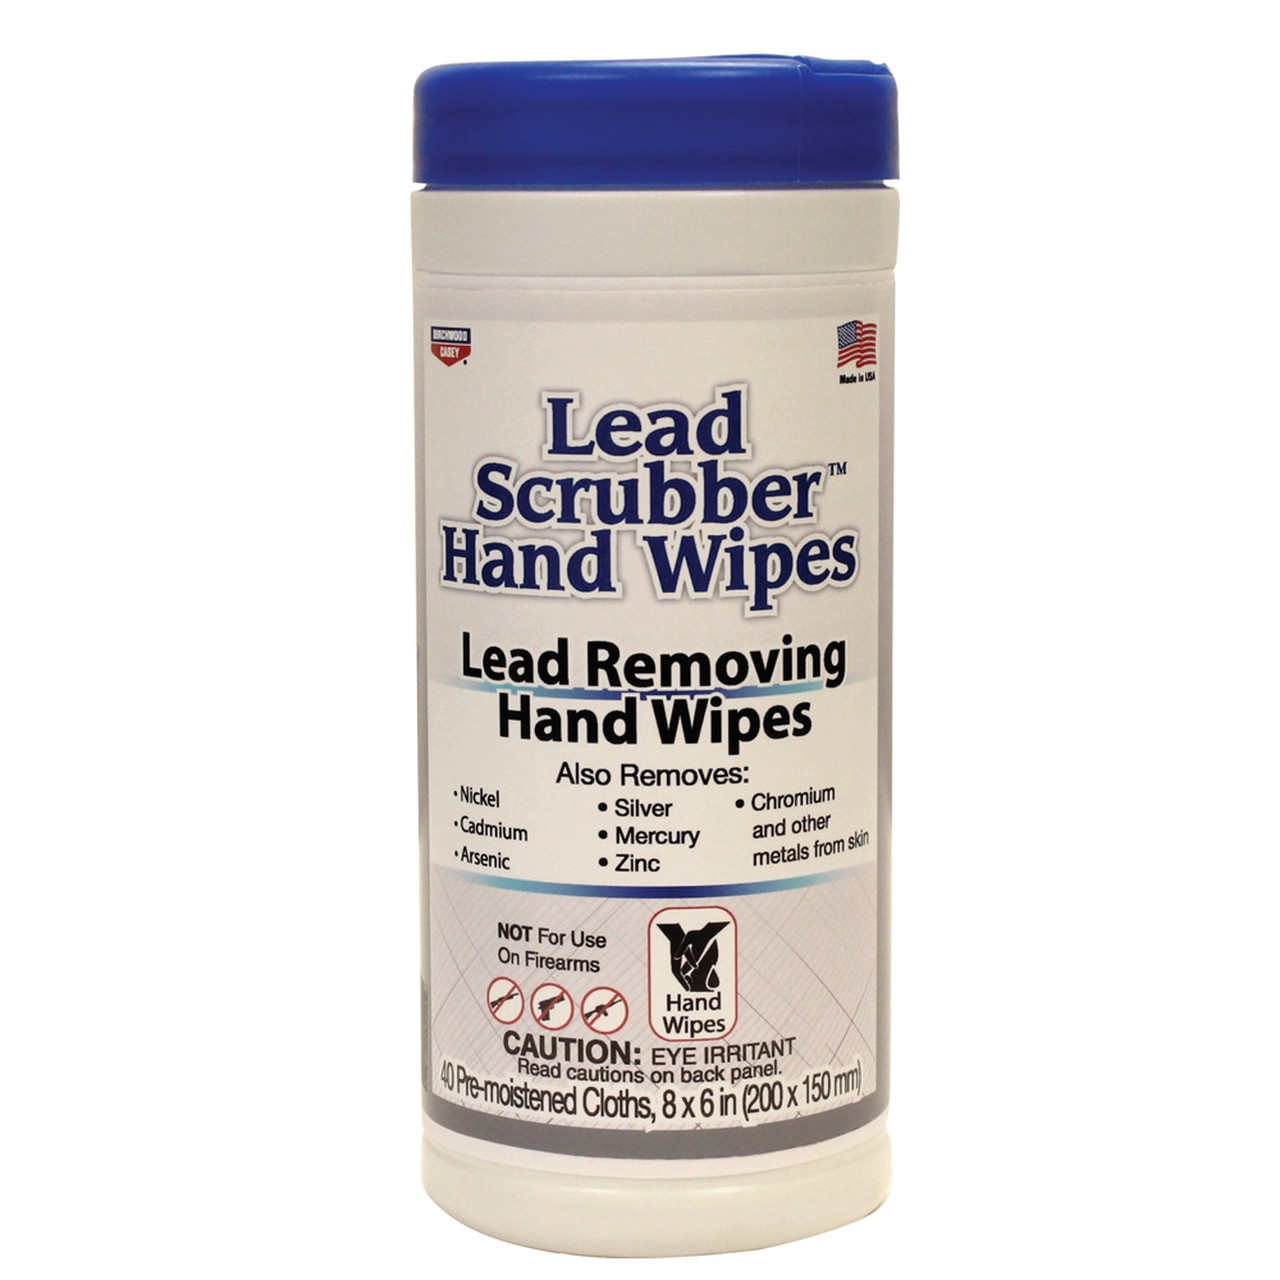 Lead Scrubber Hand Wipes